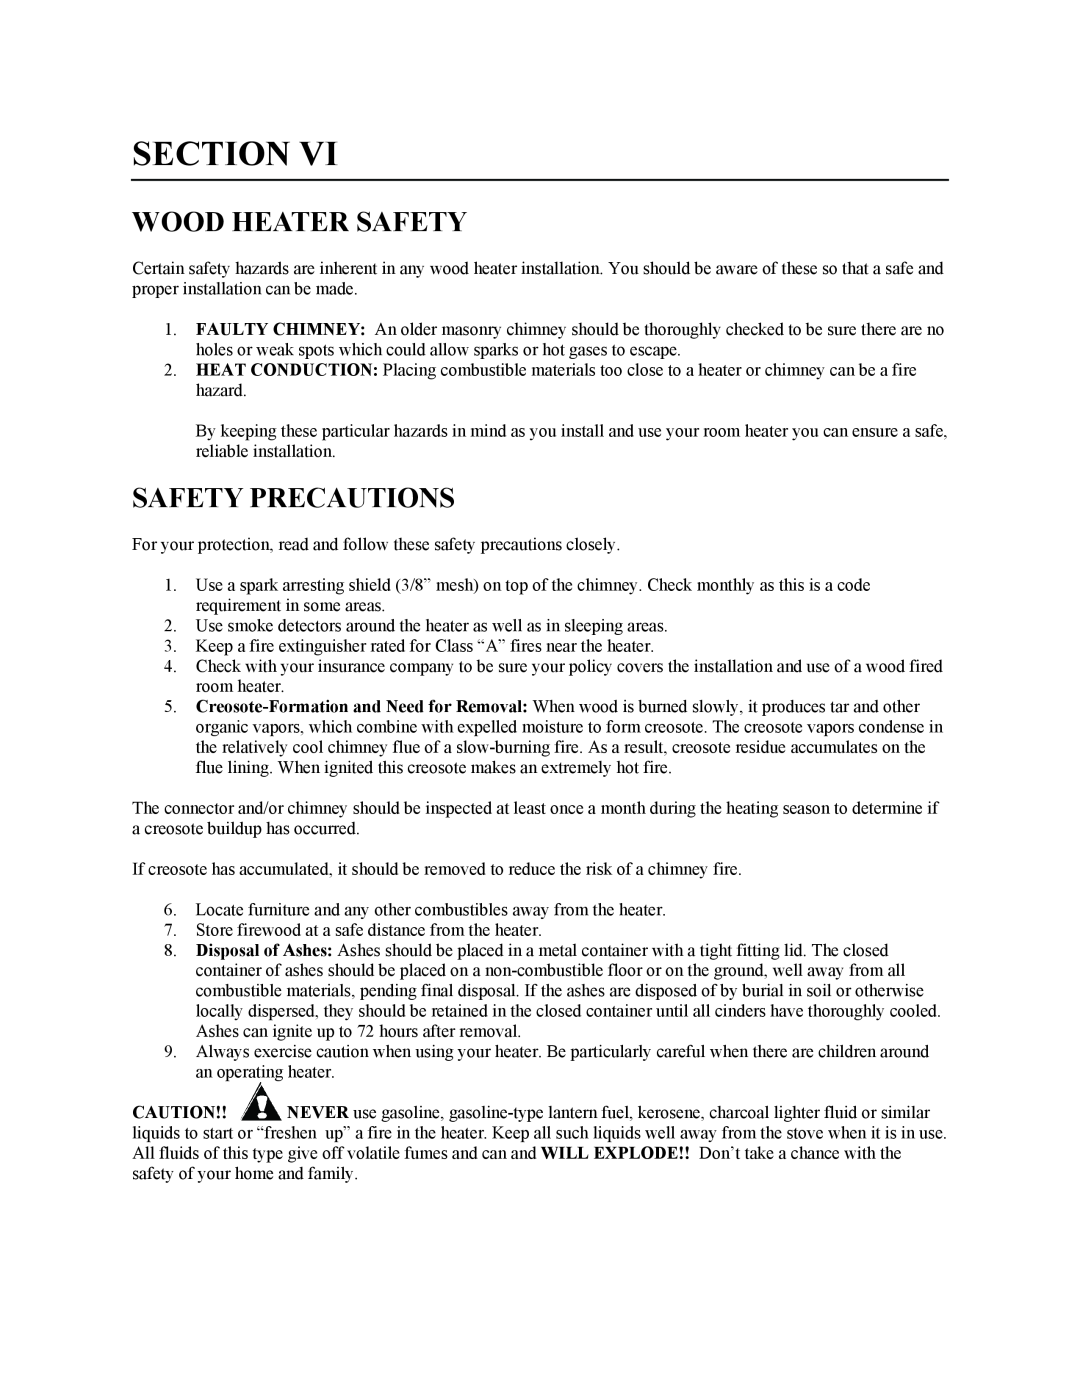 New Buck Corporation 20 Room Heater manual Wood Heater Safety, Safety Precautions, Section 